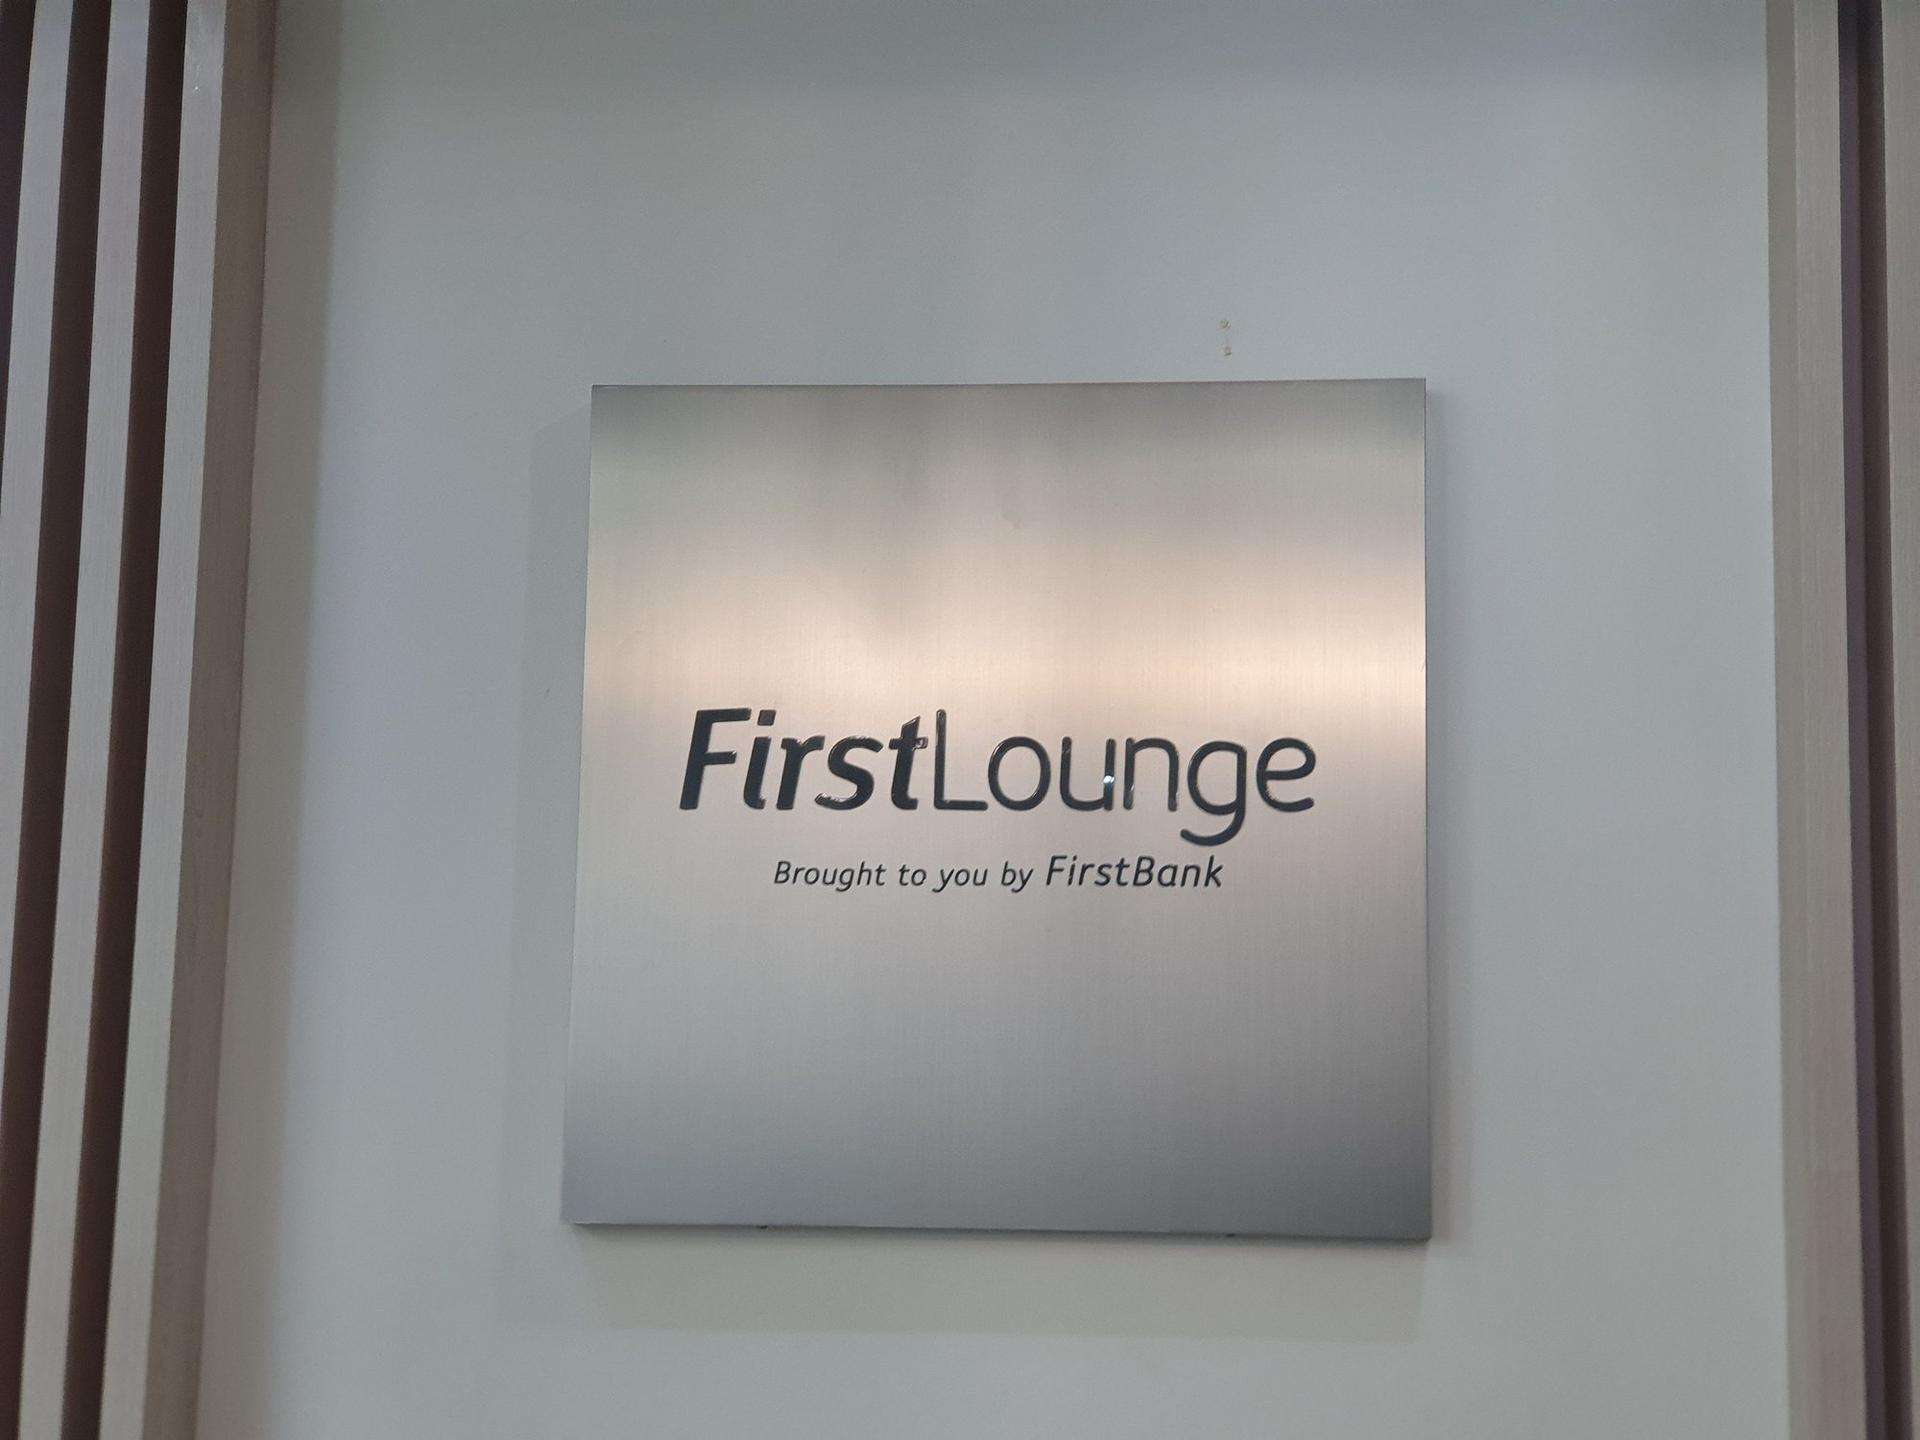 First Lounge image 8 of 28